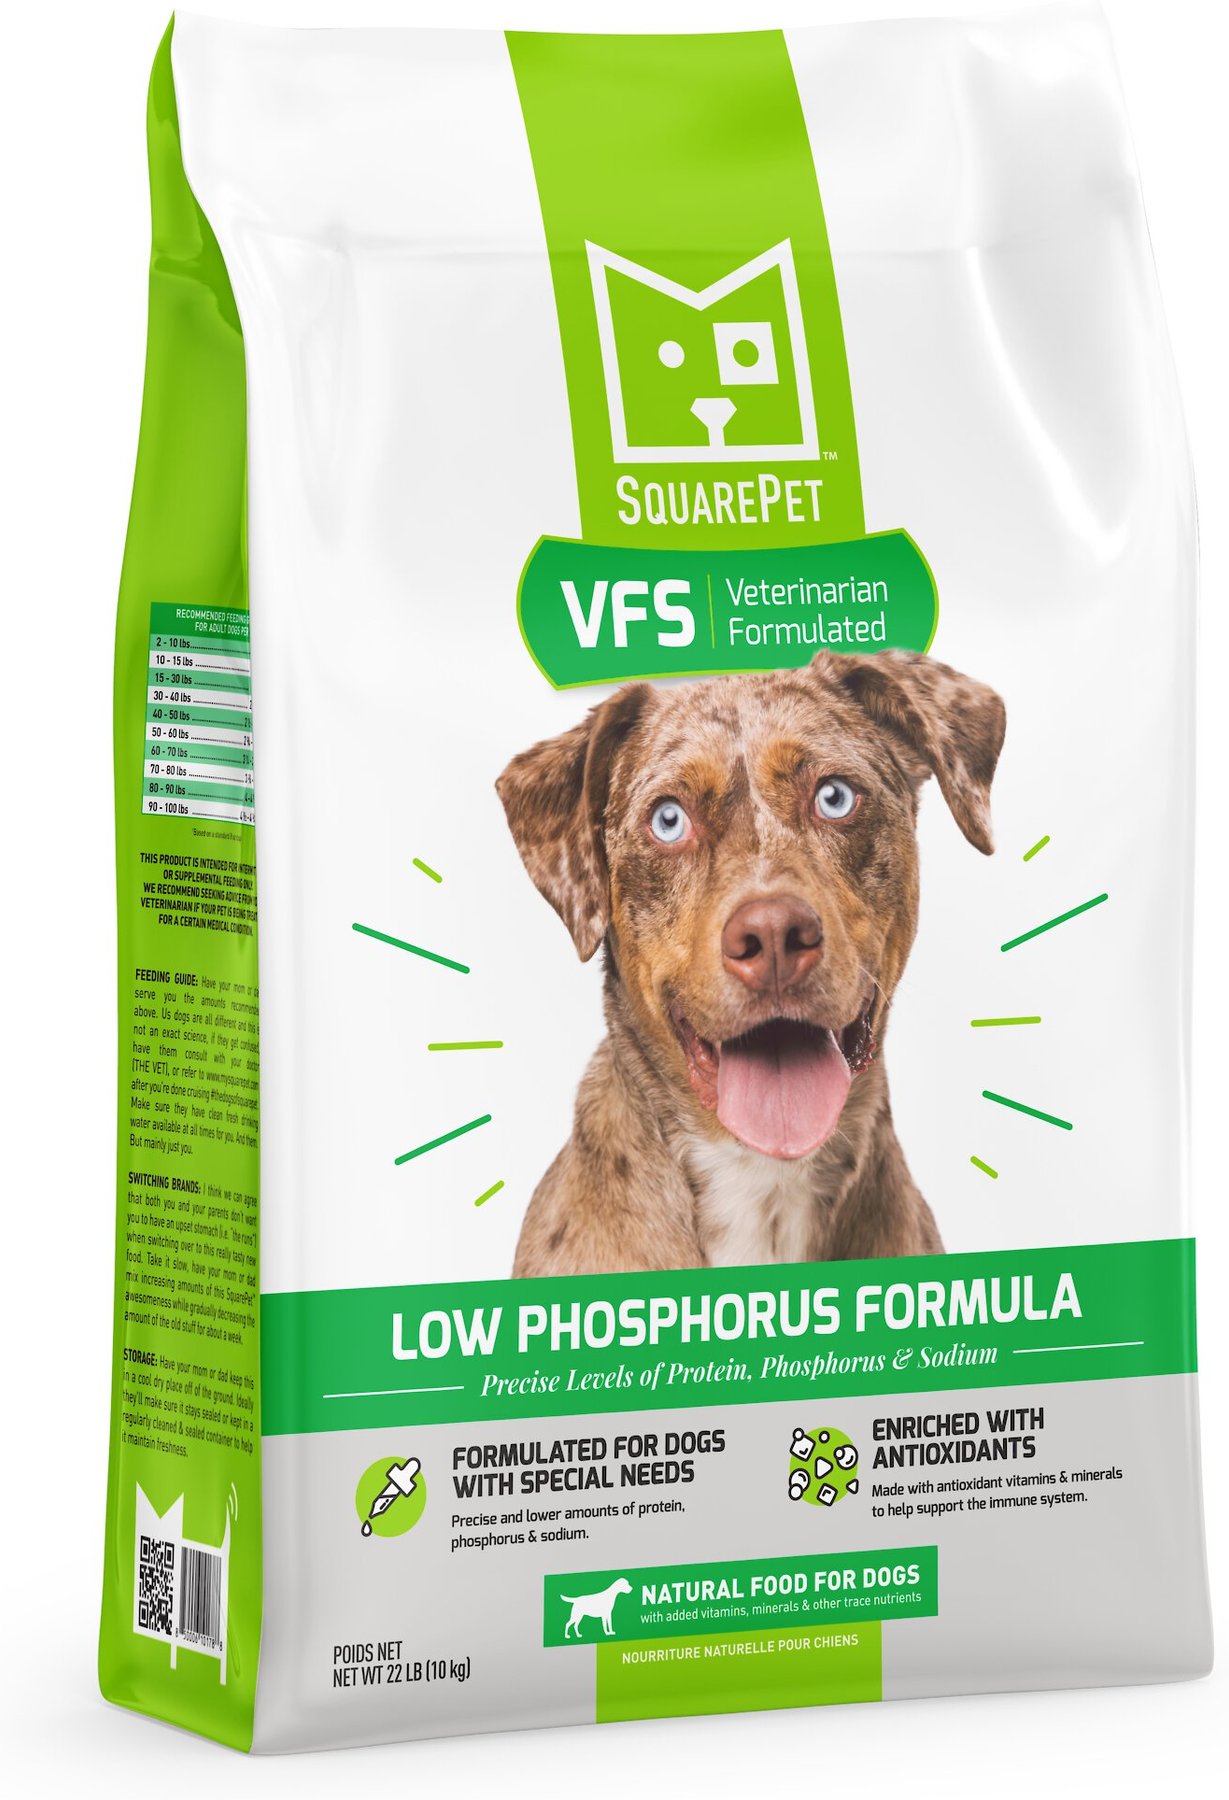 what is the normal protein level for dogs